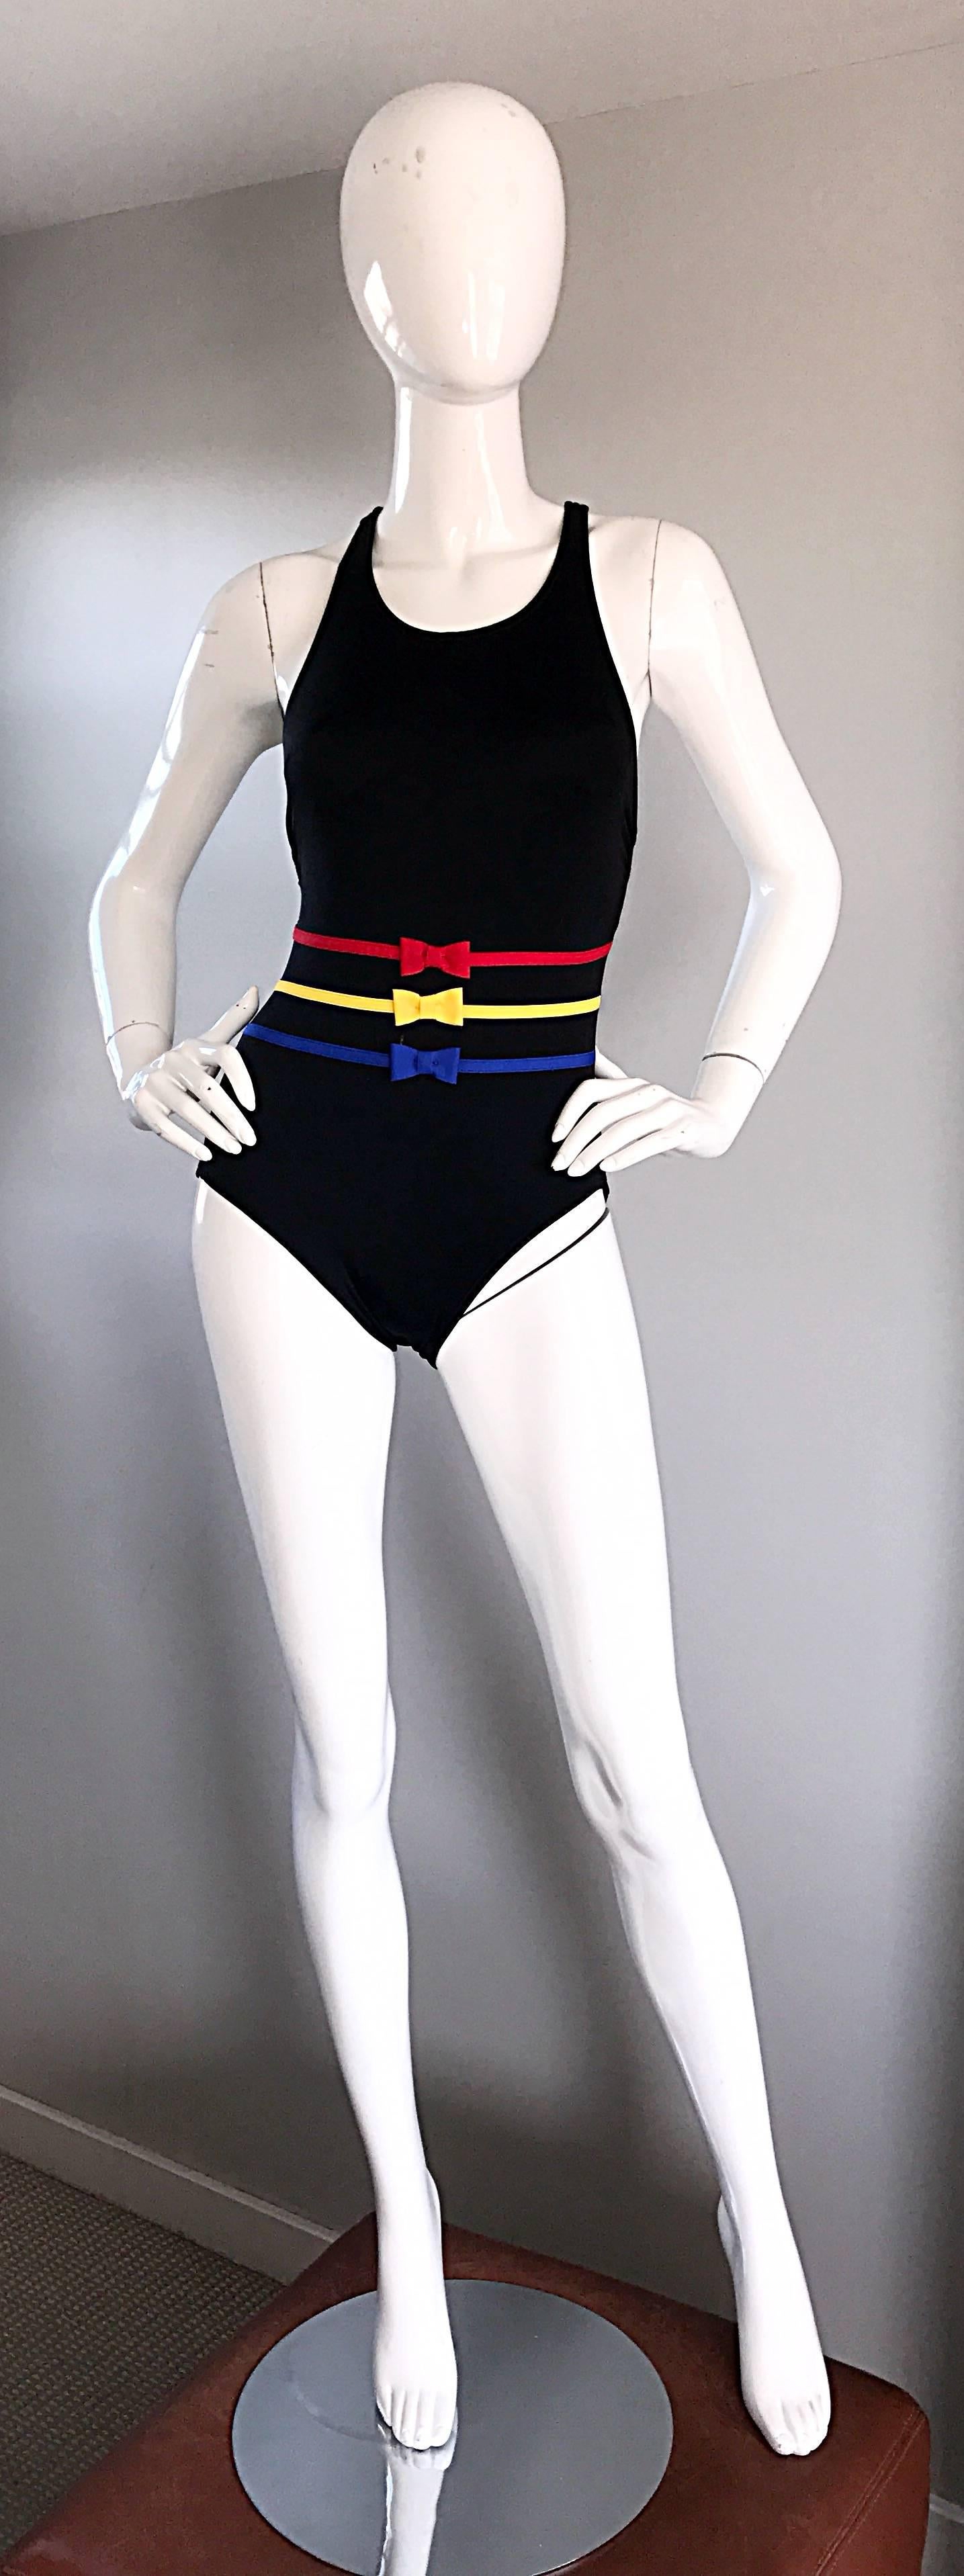 Chic new (never worn) vintage BILL BLASS 1990s one piece swimsuit or bodysuit! Jet black color, with yellow, blue and red ribbon and bows across the waist. Super flattering fit stretches to fit the body. Sexy open back, with hook closure at back